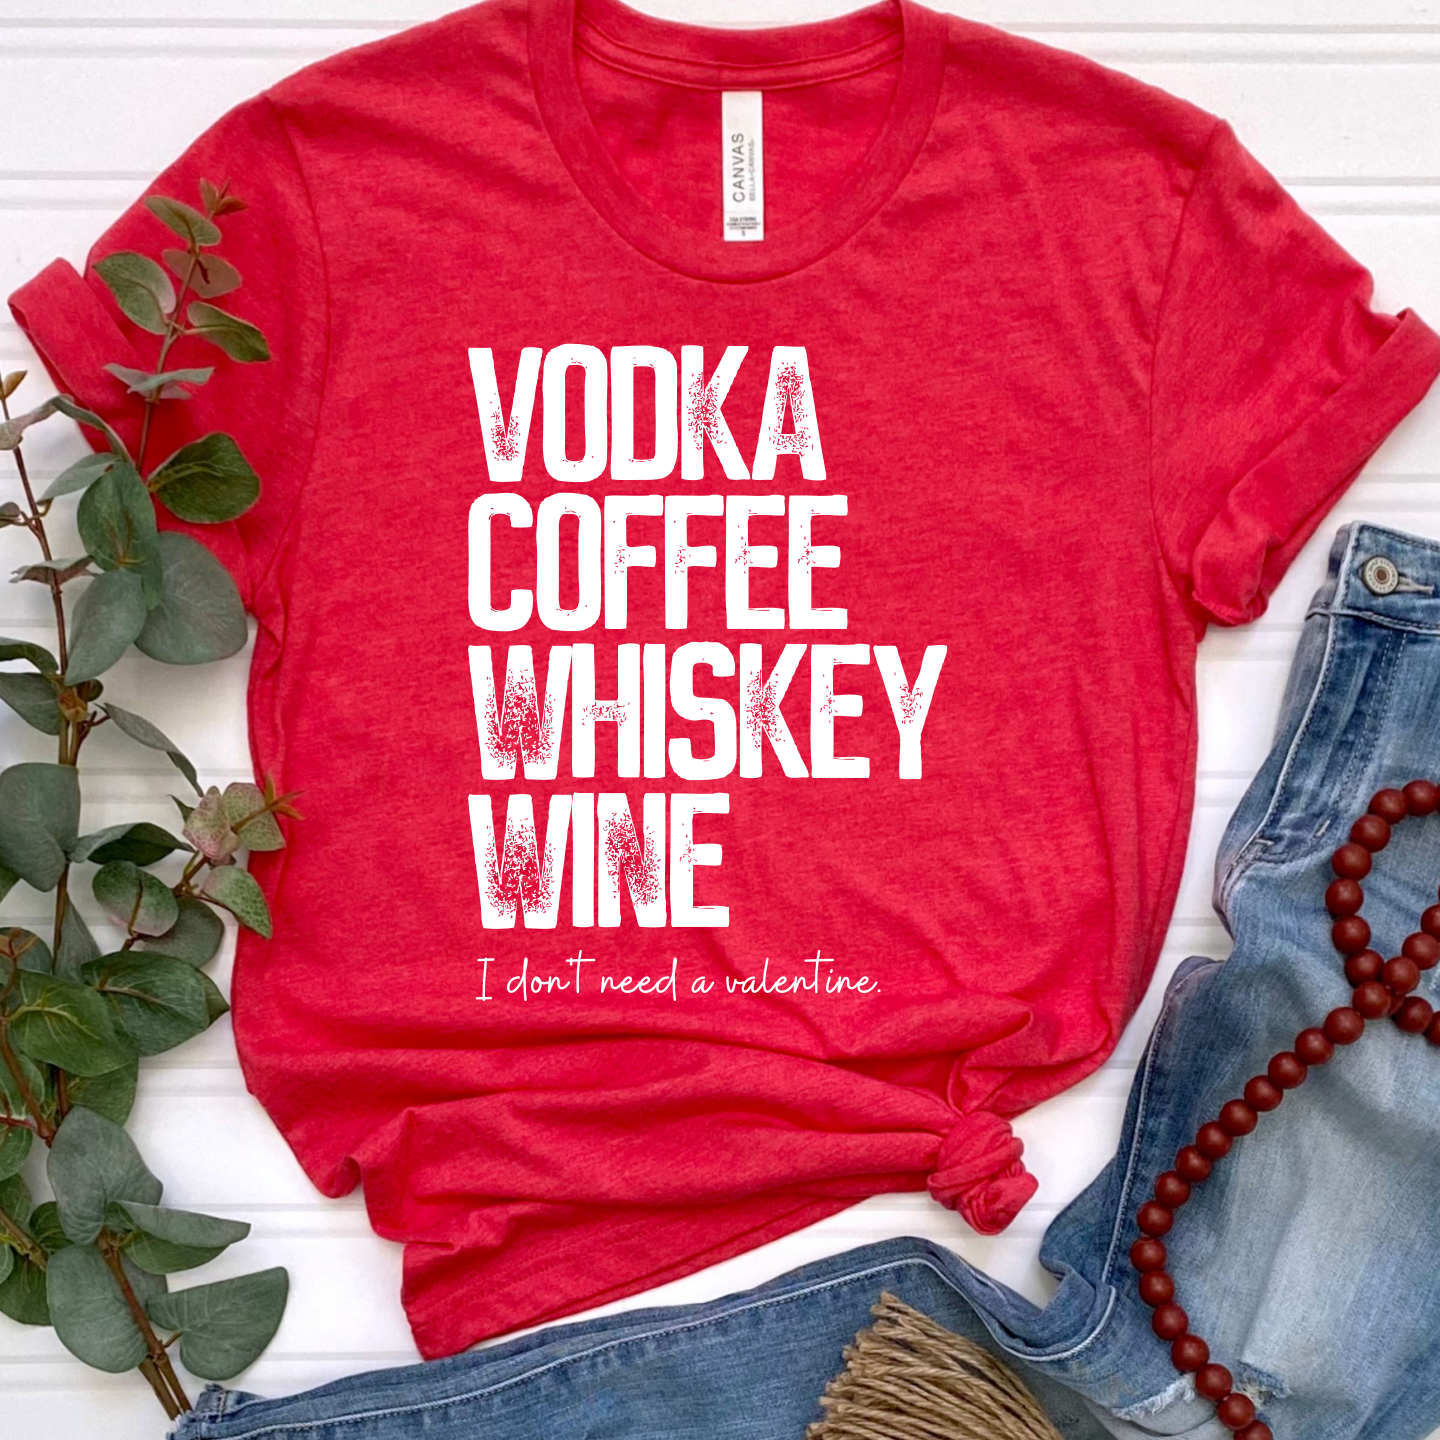 Vodka Coffee Whiskey Wine, I don't need a valentine - PNG